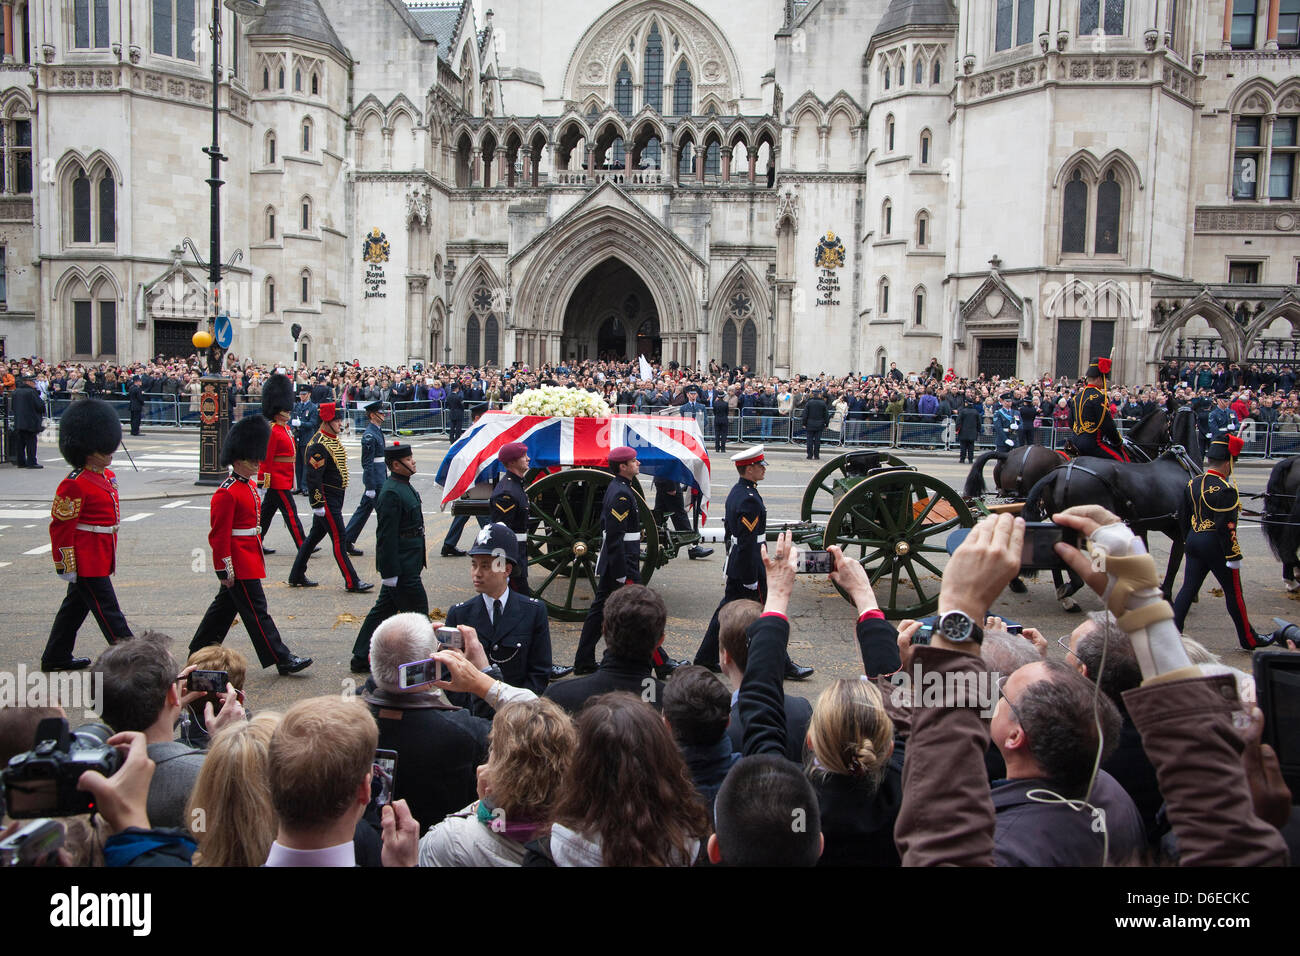 London, UK. 17th April 2013. The Ceremonial Funeral Of Former British Prime Minister Baroness Thatcher, London, UK.  Crowds line up to watch the Ceremonial Funeral of Baroness Thatcher pass along Fleet Street, London, UK. Credit: Jeff Gilbert/Alamy Live News Stock Photo